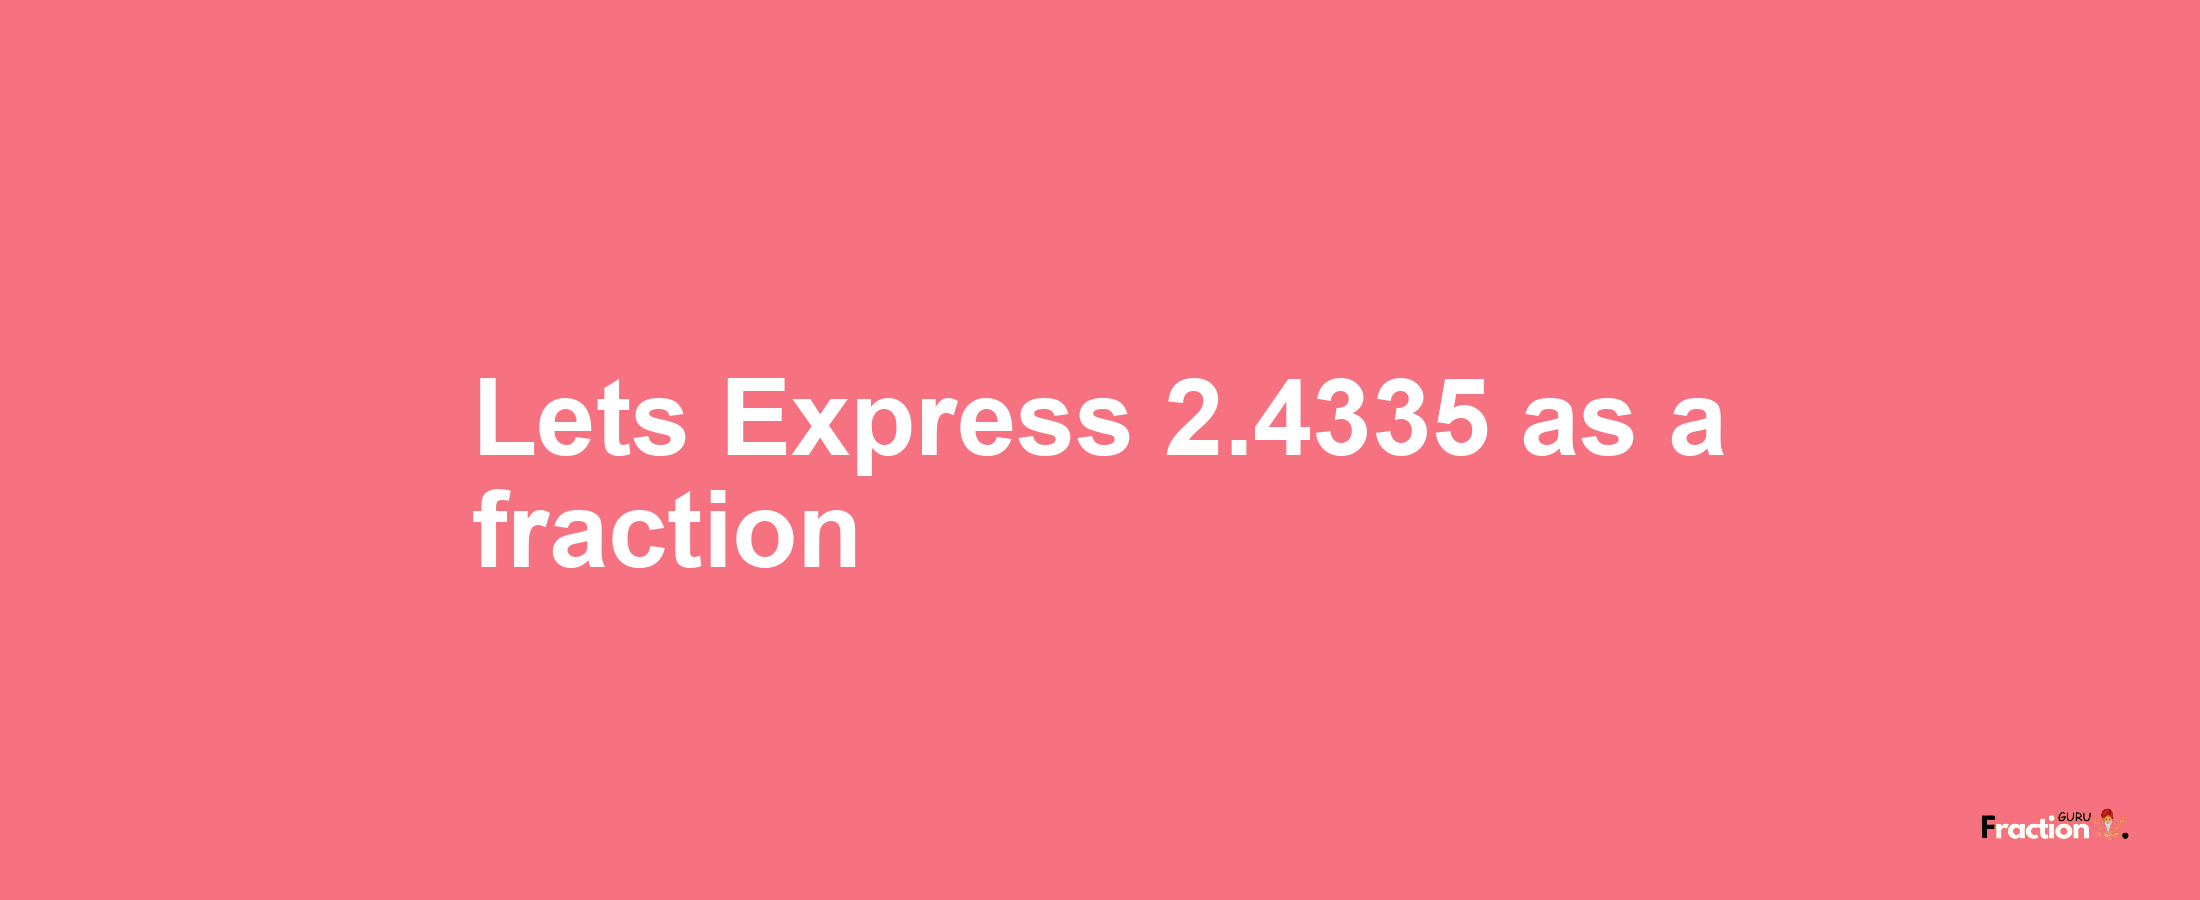 Lets Express 2.4335 as afraction